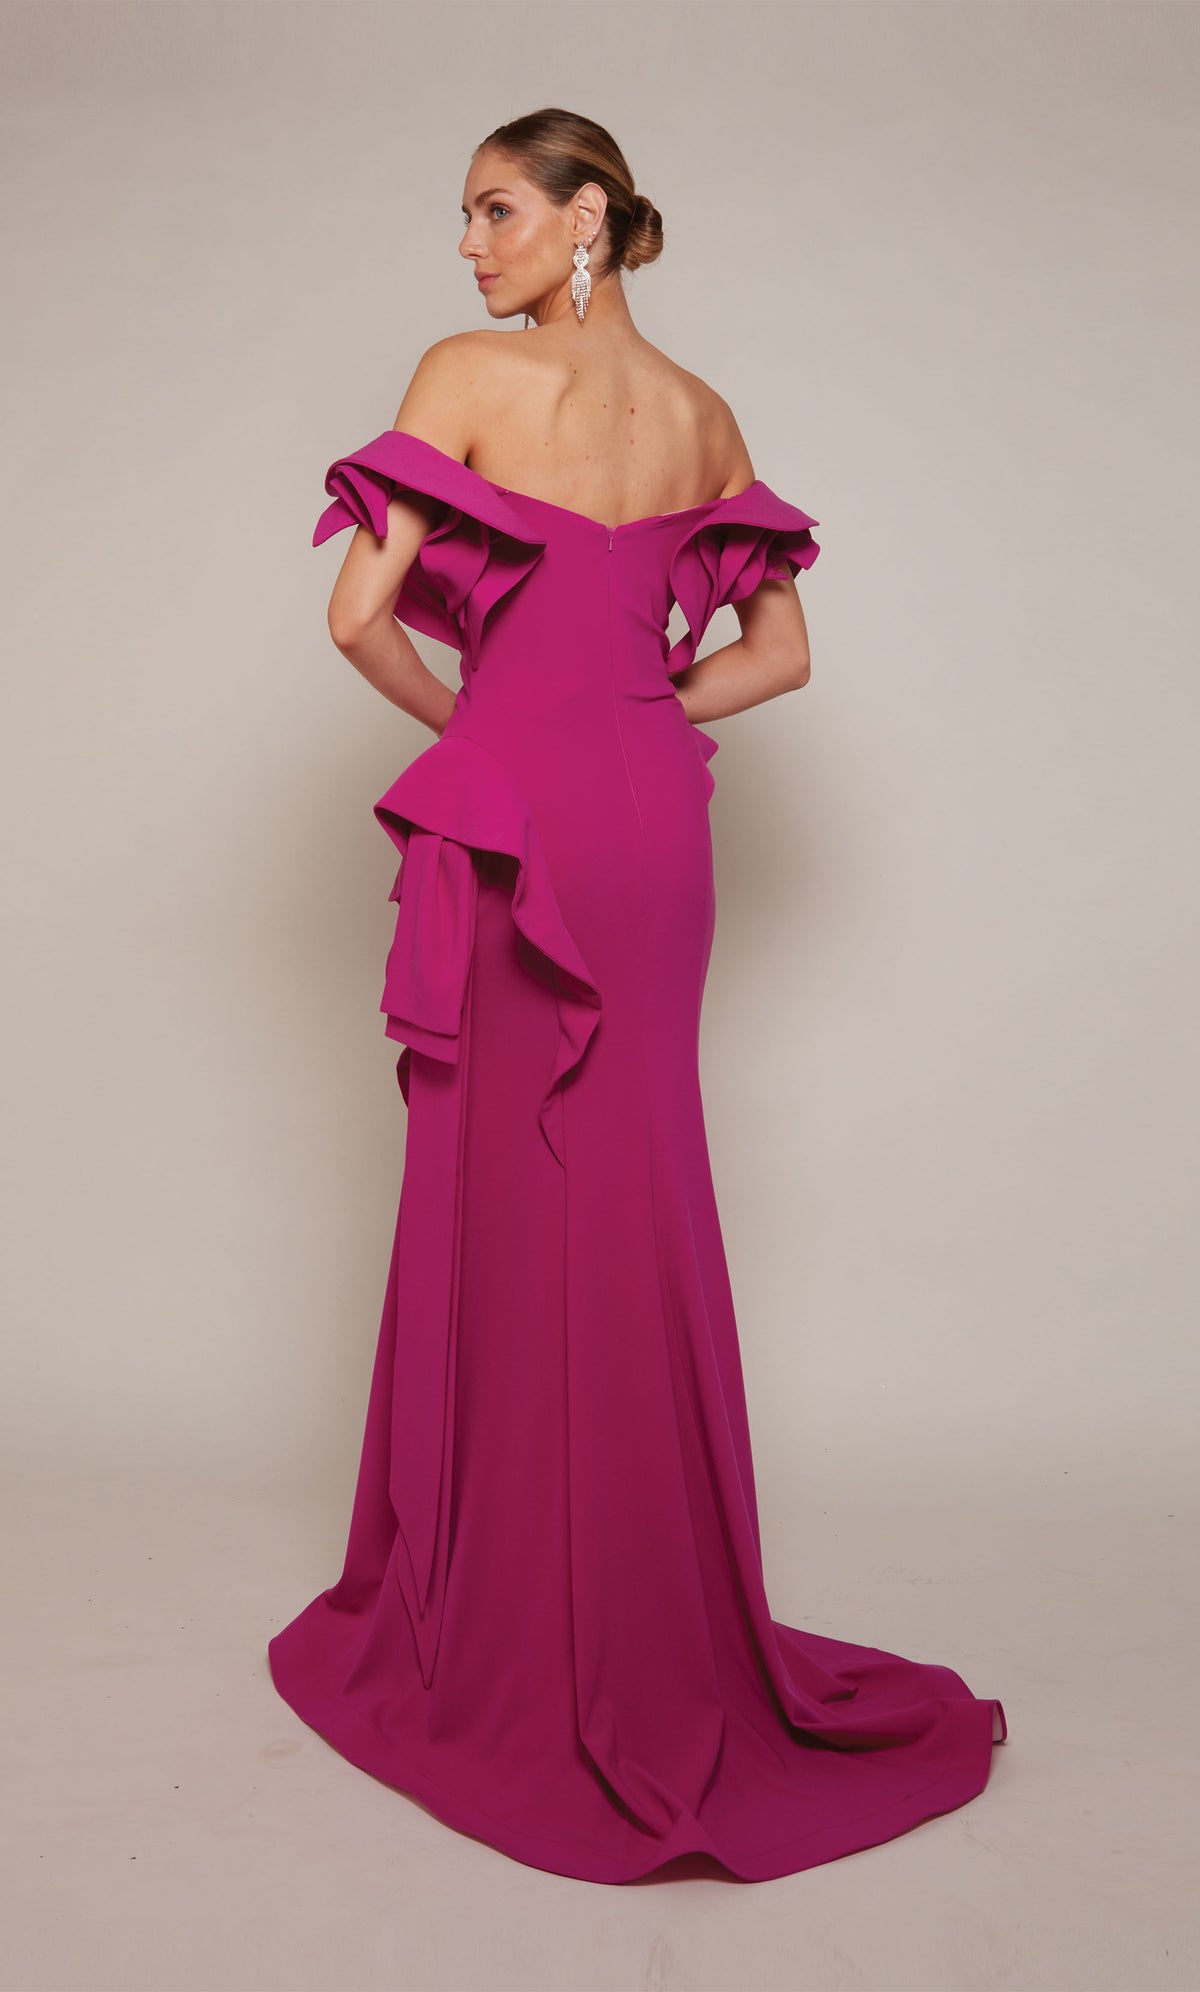 A chic, raspberry pink wedding guest dress boasting an off-the-shoulder neckline, rosette sleeves, and a sheath skirt with cascading ruffles ending in a dramatic train. An excellent choice for a formal evening wedding.